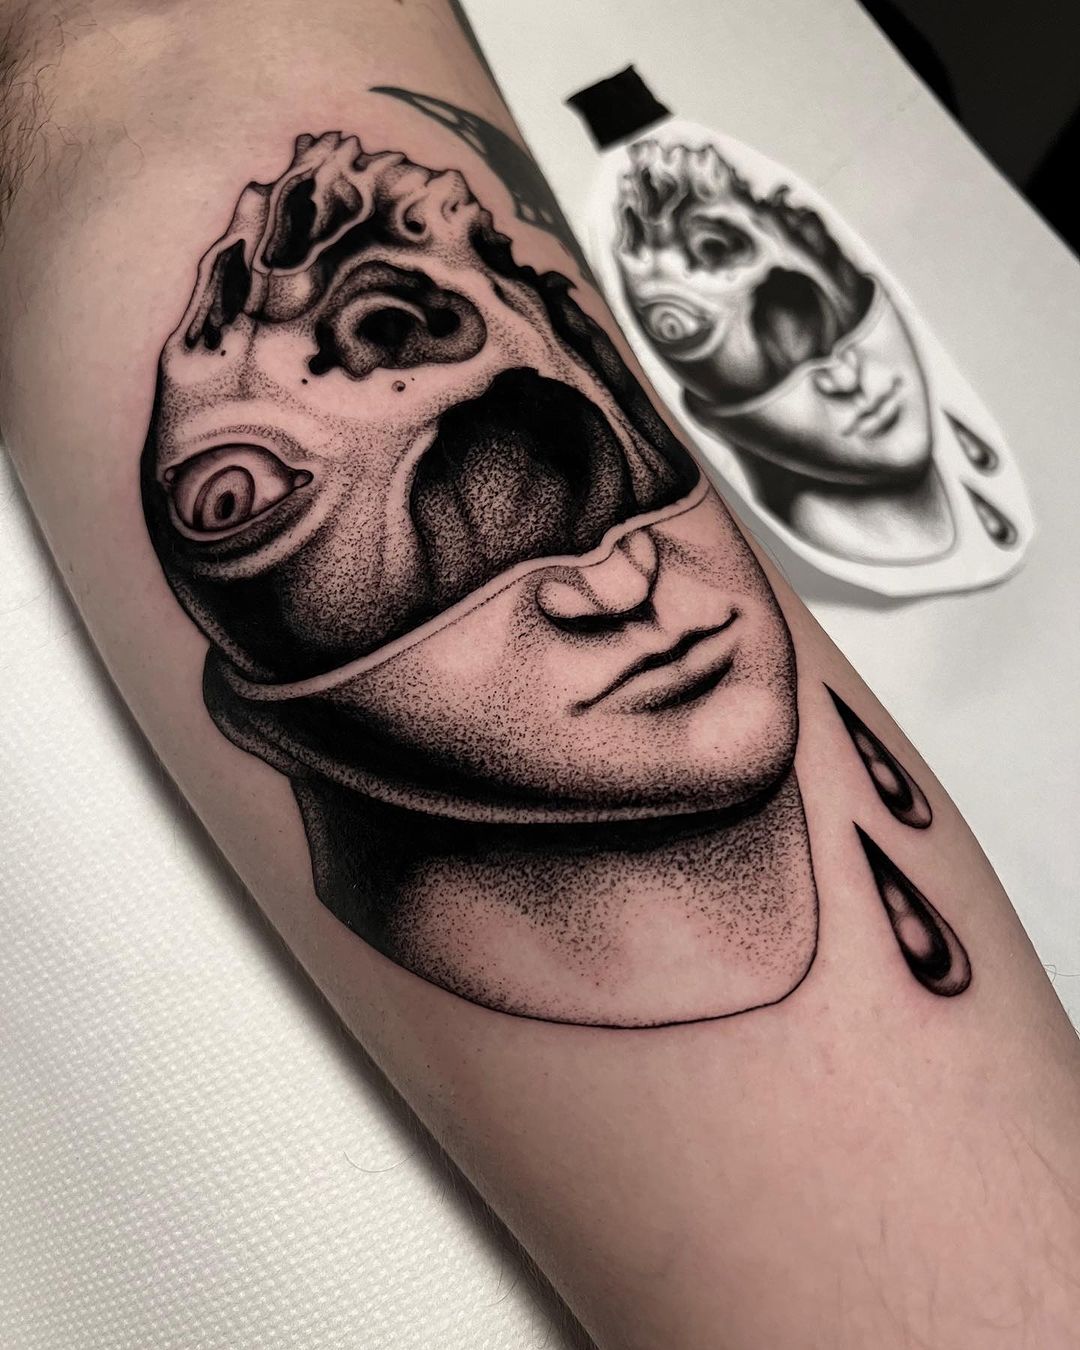 Black and grey tattoo by davide dw